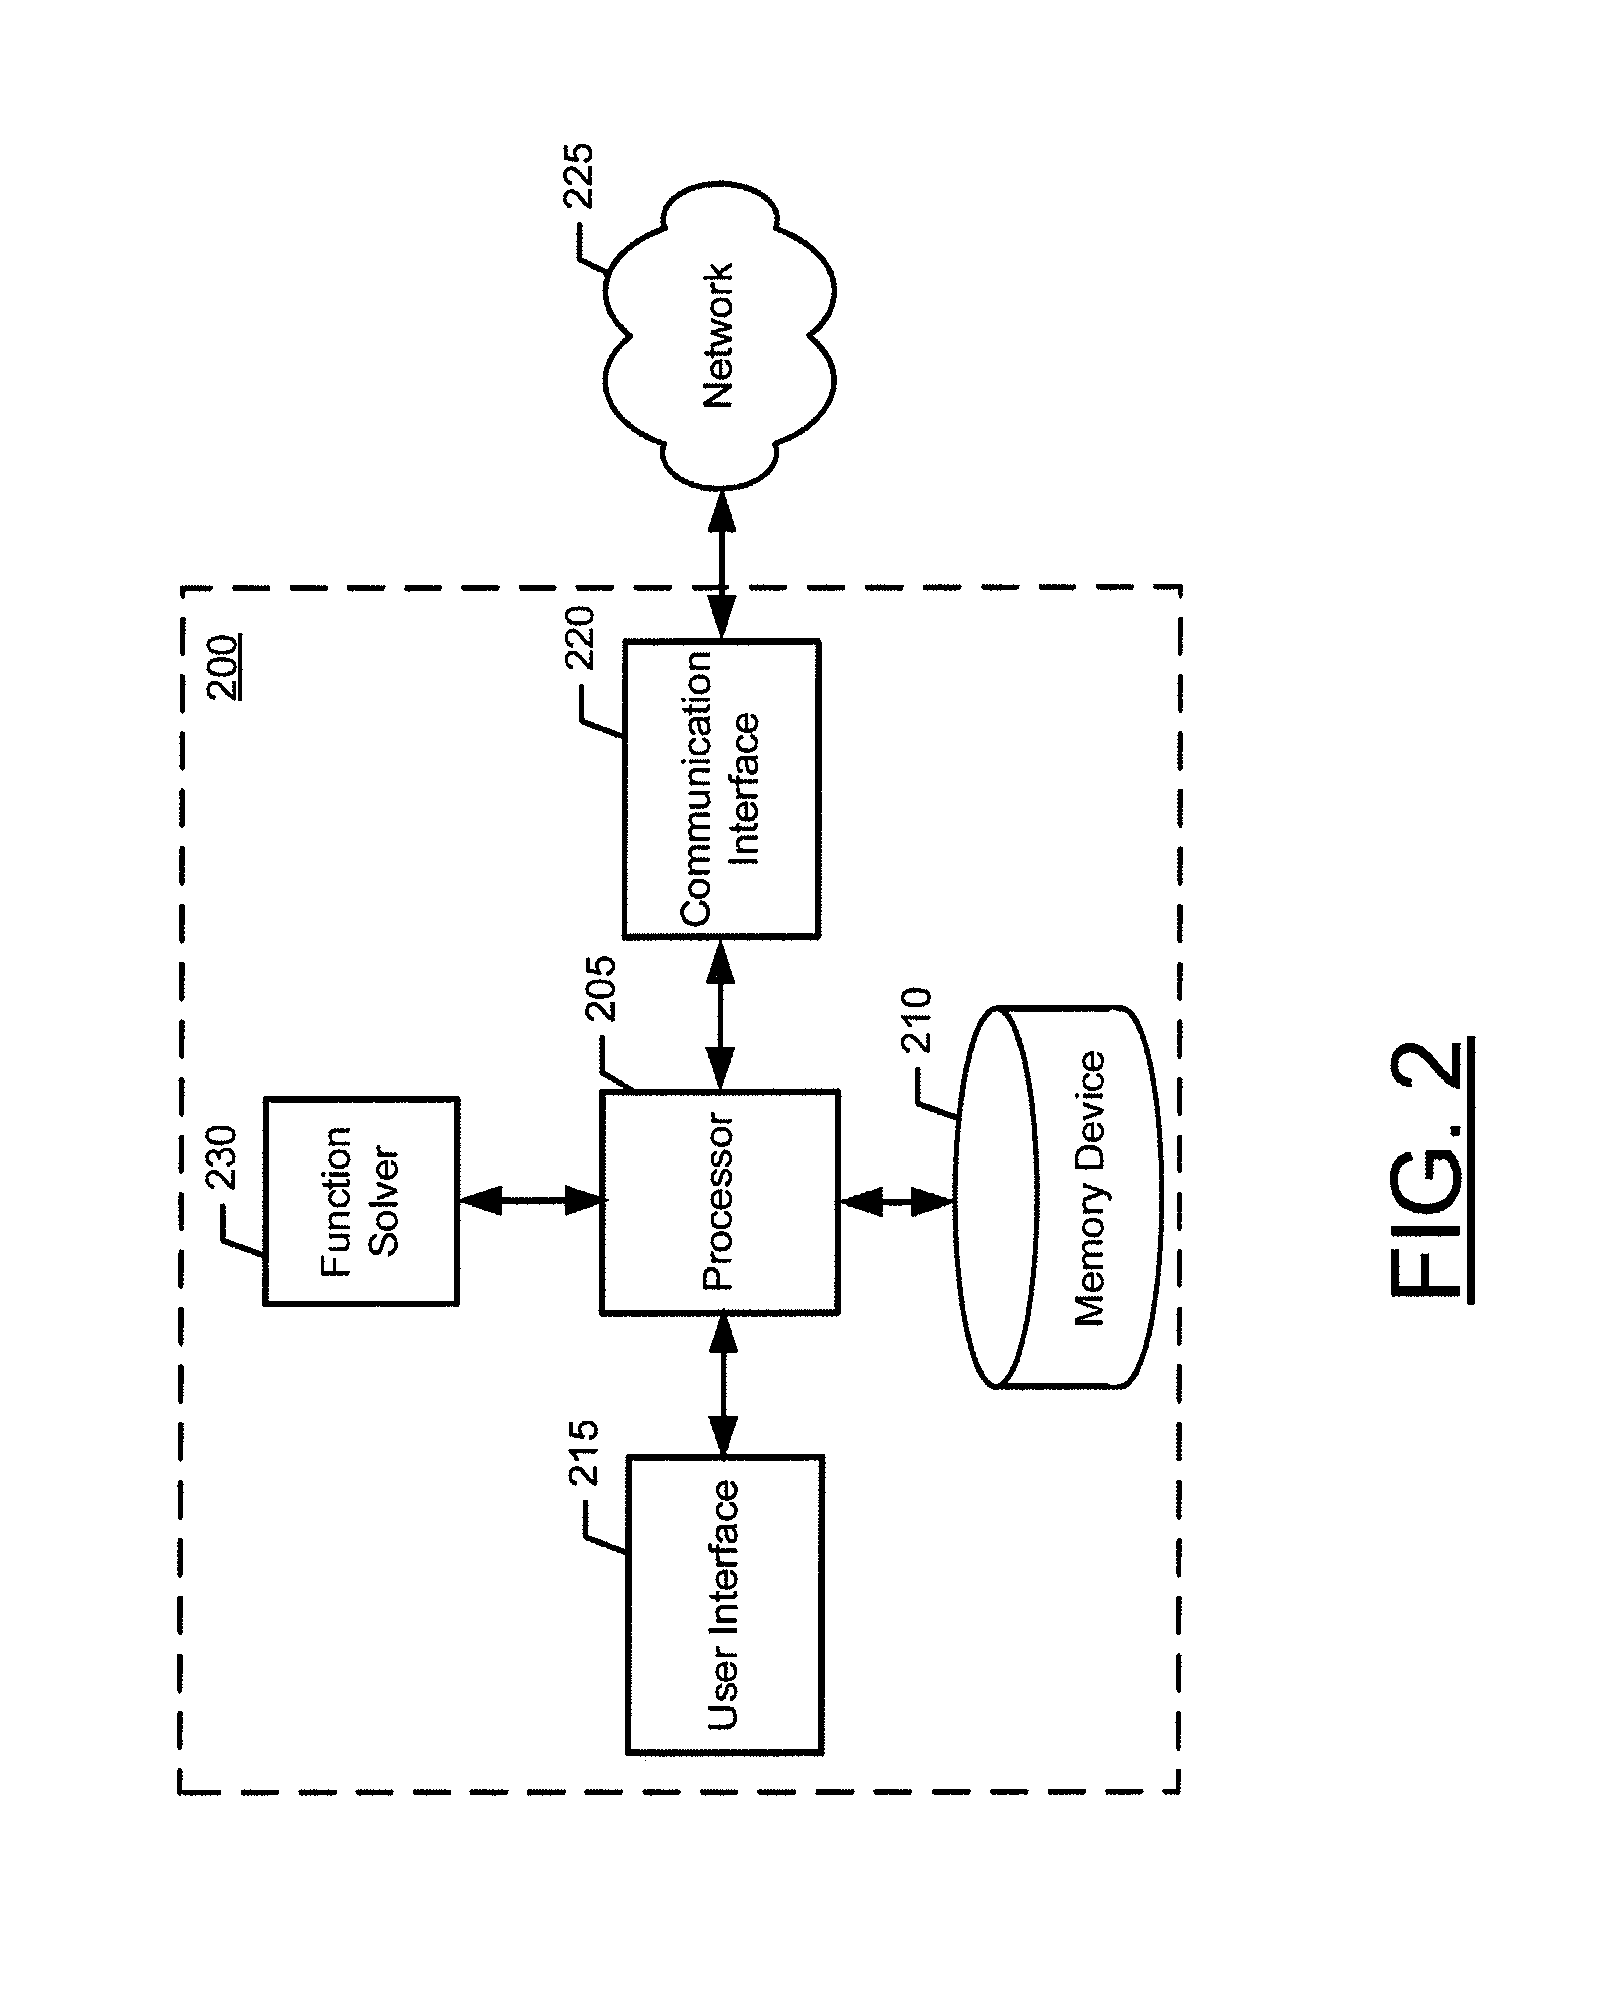 Method, apparatus, and computer program product for resource, time, and cost aware variable-precision solving of mathematical functions